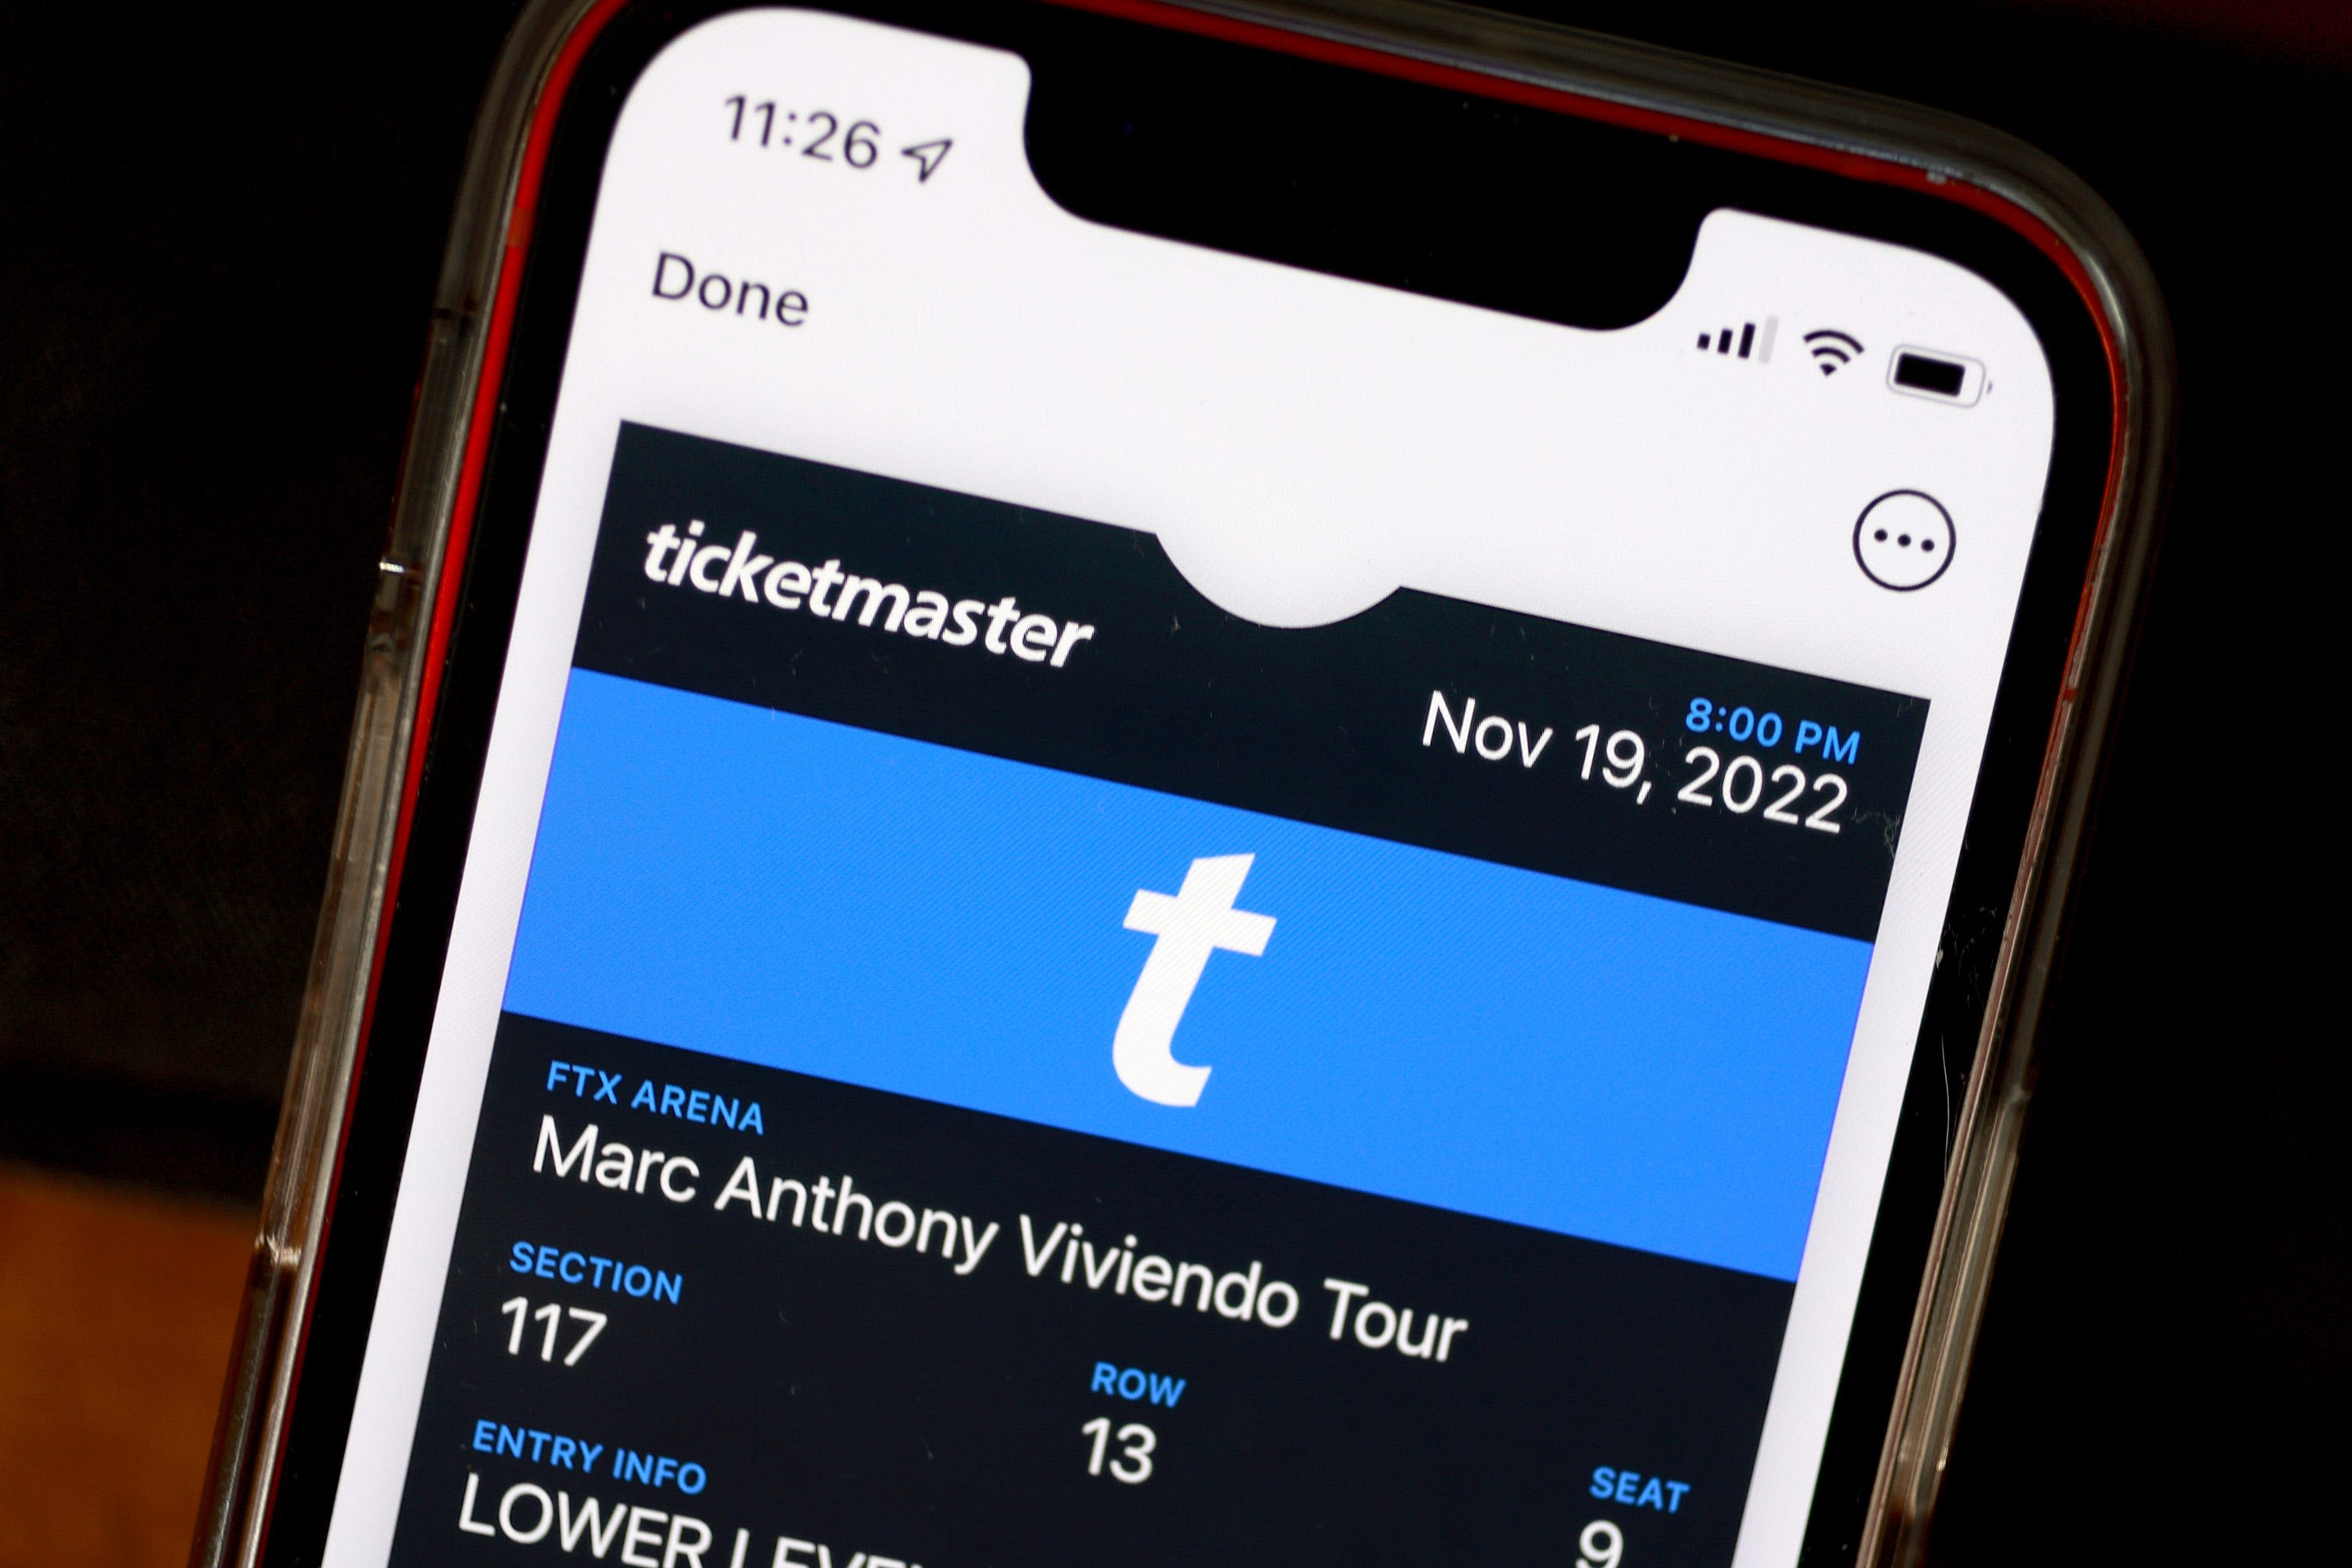 Live Nation, Ticketmaster face antitrust lawsuit from DOJ. Will ticket prices finally drop?